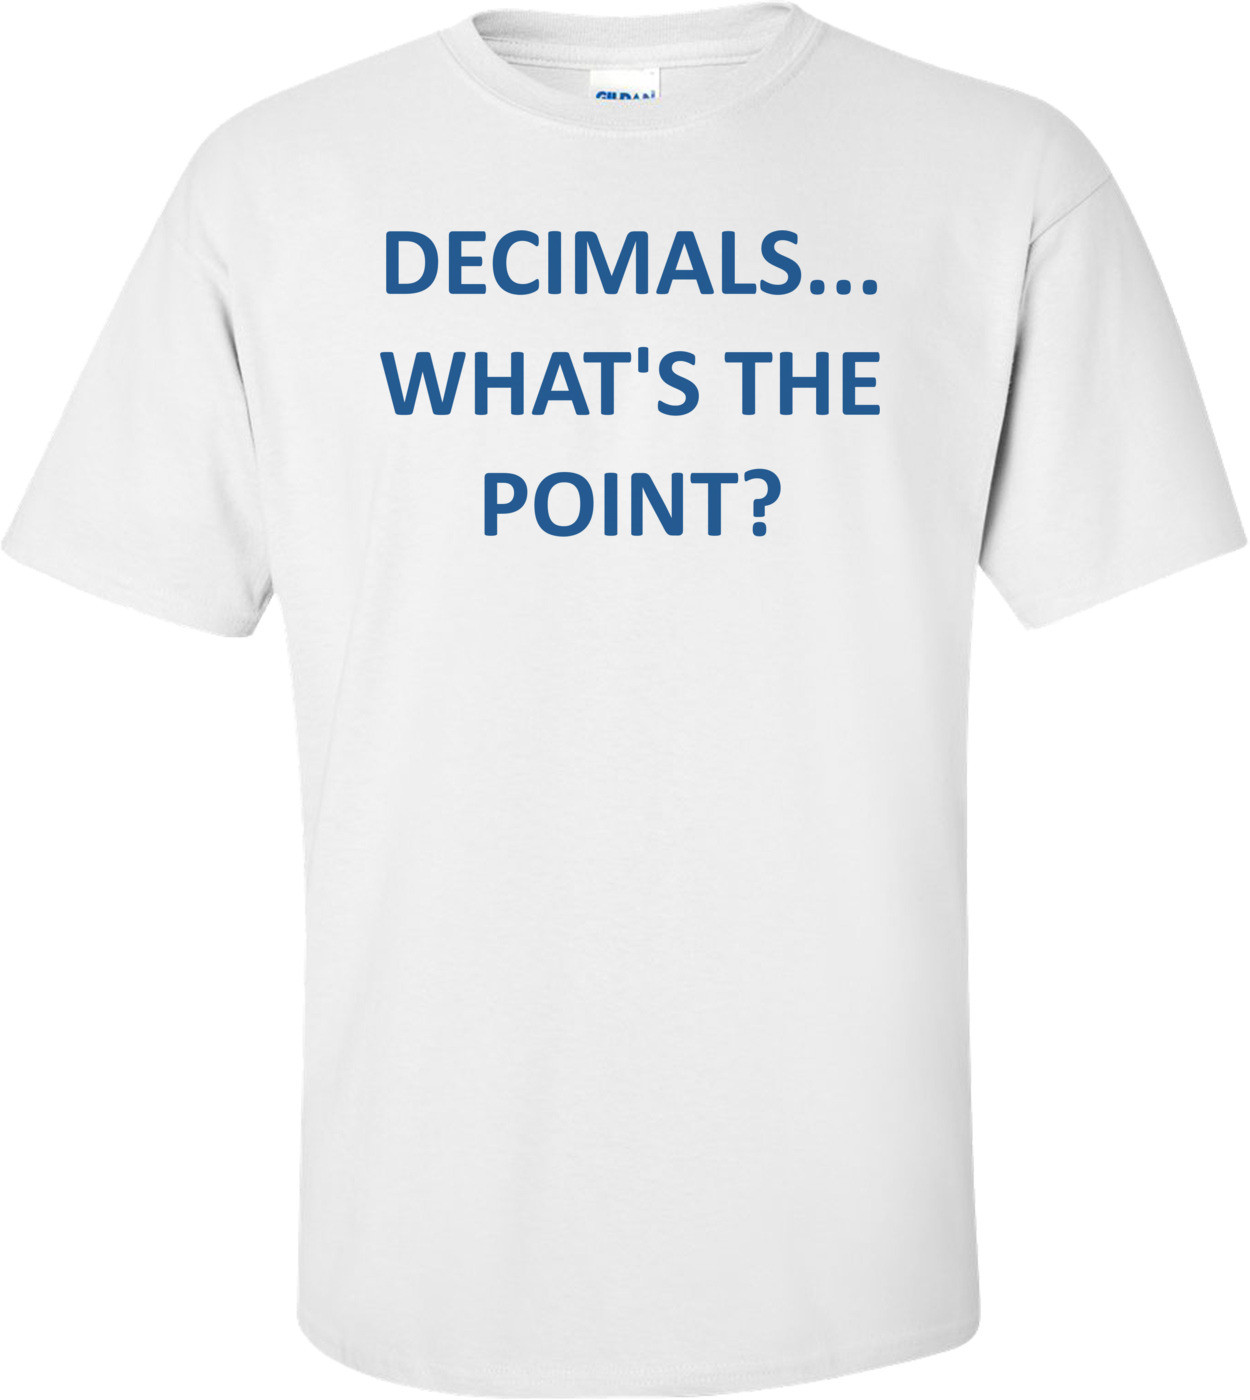 DECIMALS... WHAT'S THE POINT? Shirt